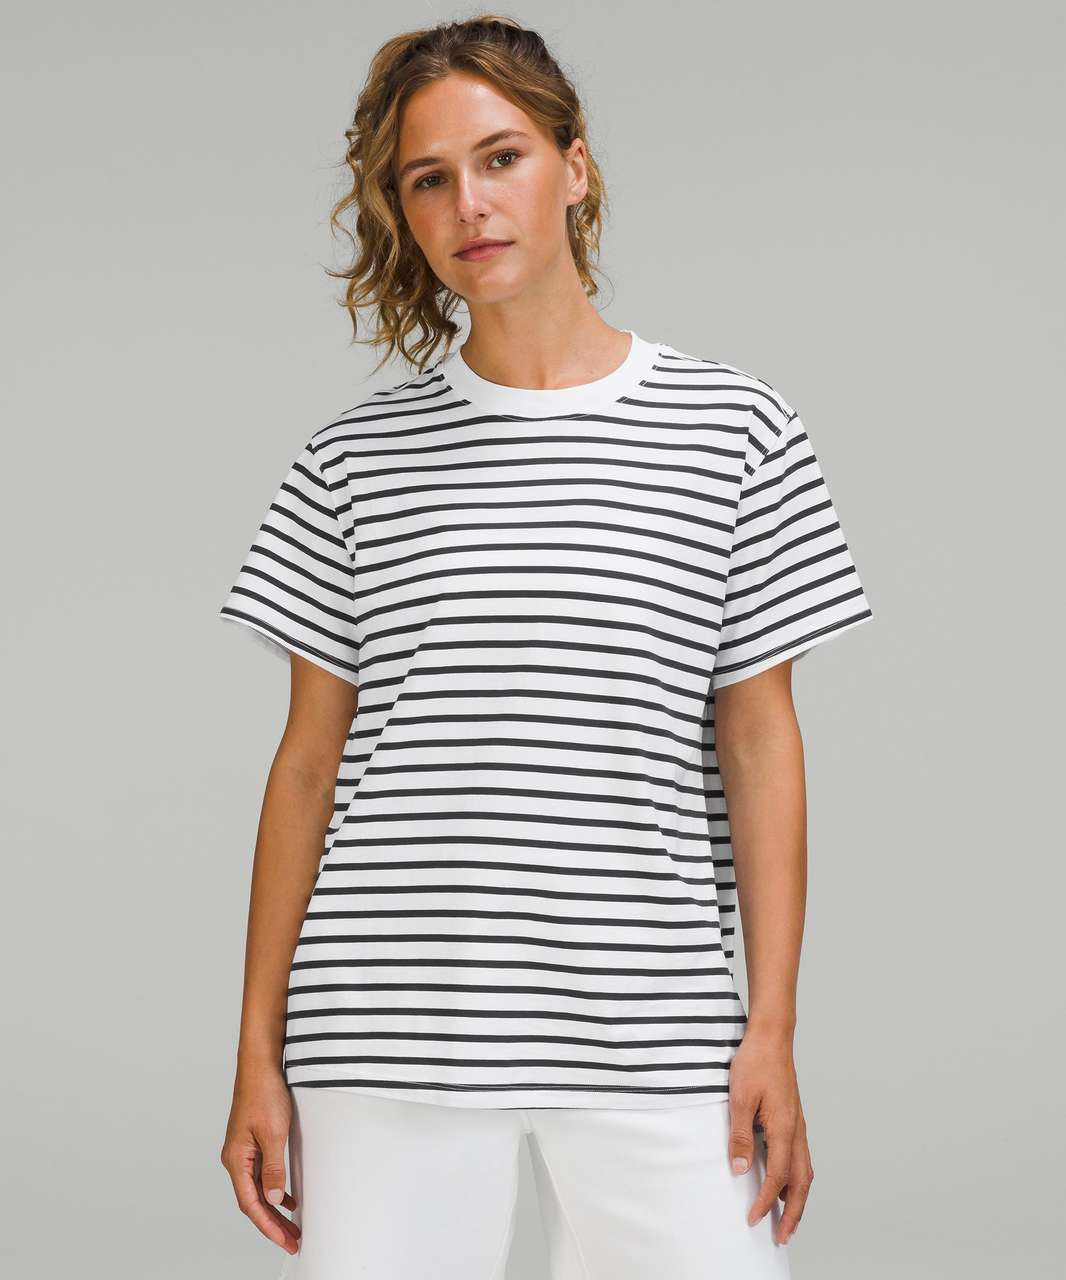 Lululemon All Yours Cotton T-Shirt - Yachtie Stripe White Graphite Grey